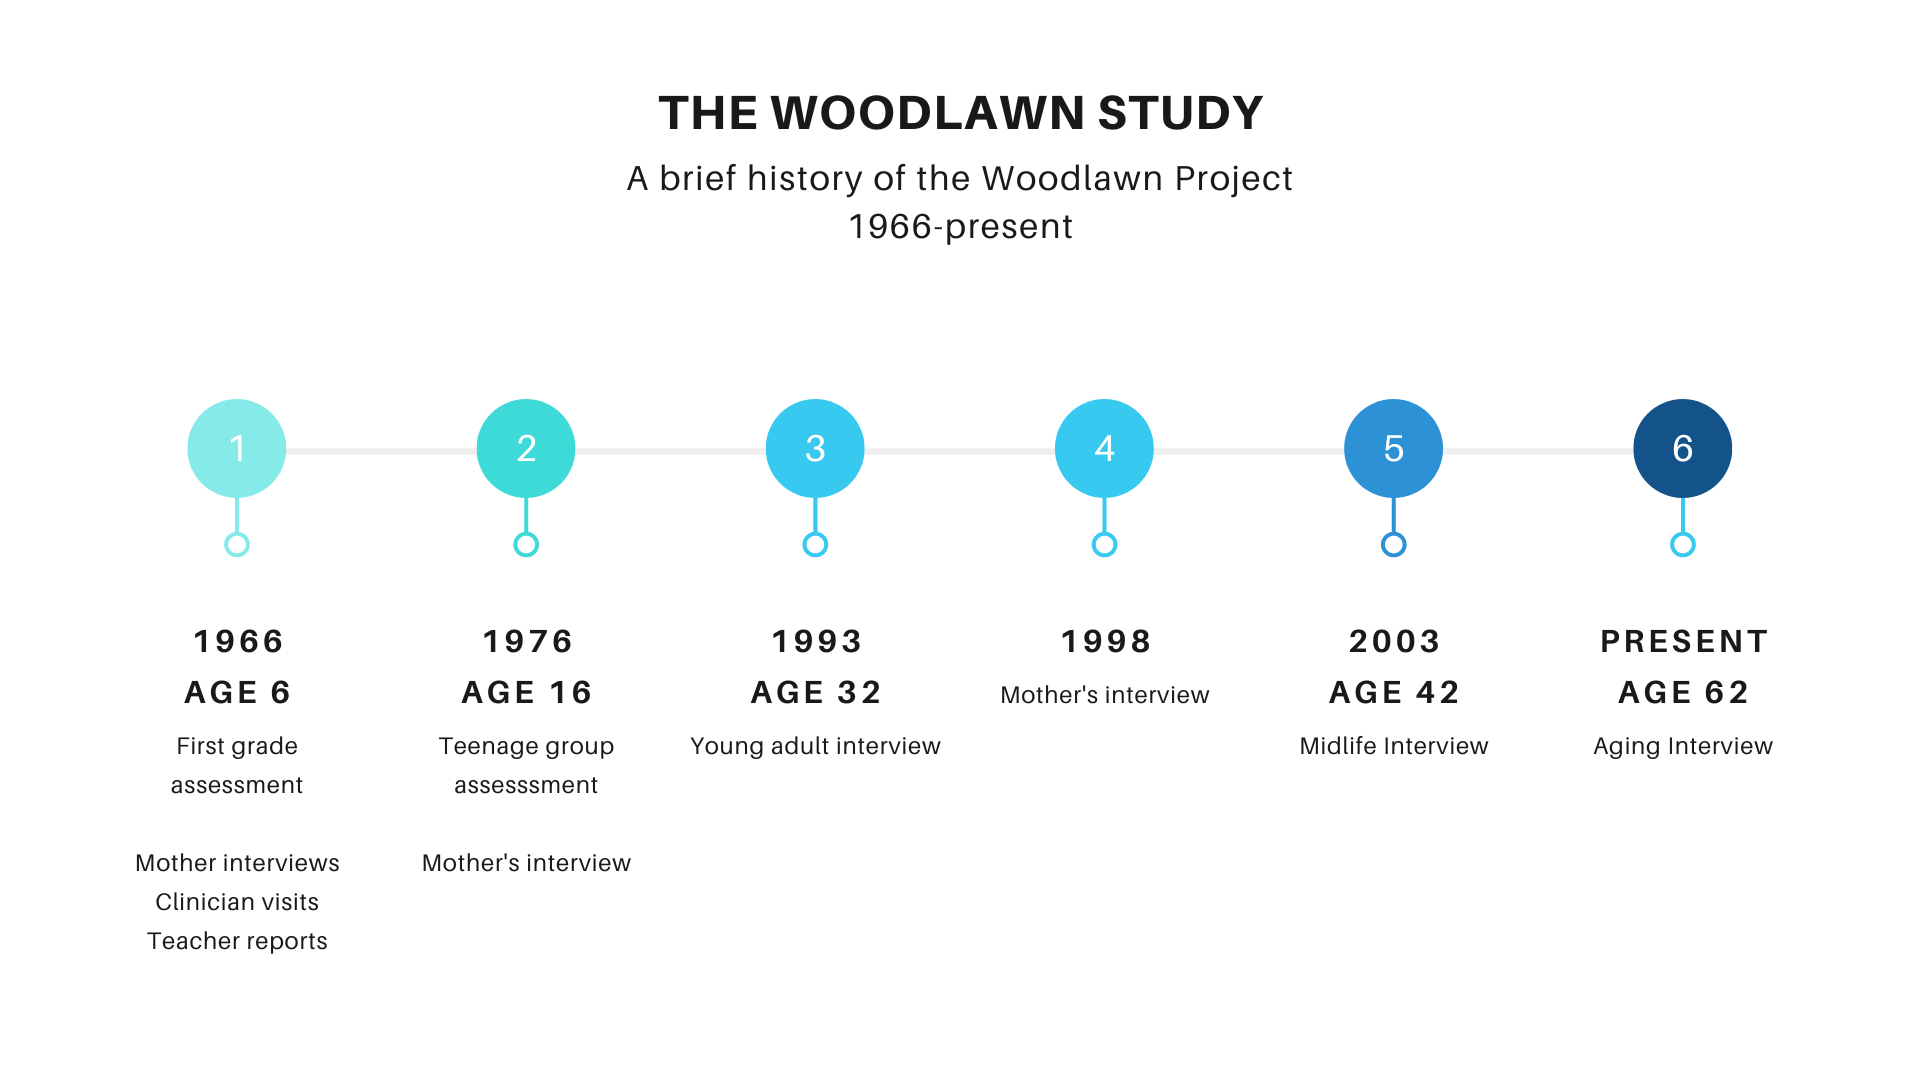 Woodlawn Project Timeline